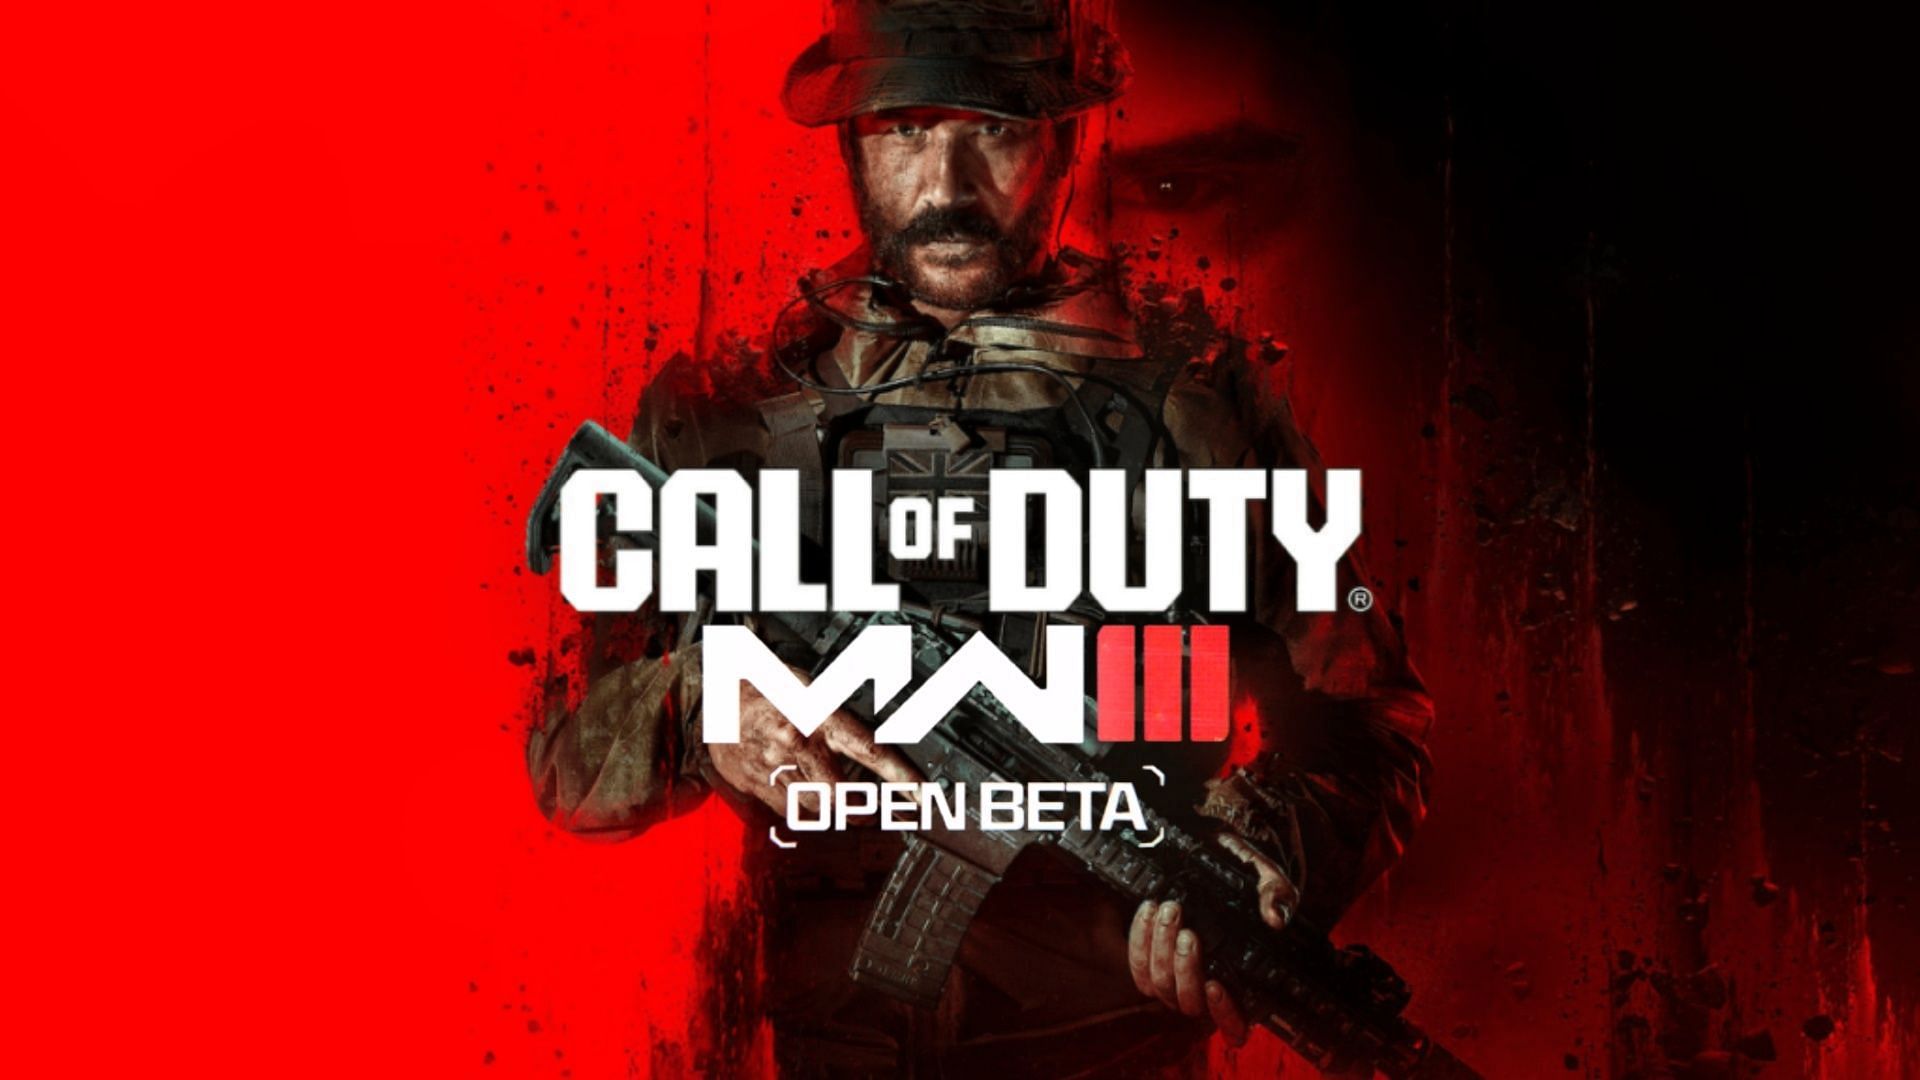 Modern Warfare 3 Open Beta How to get a code, redeem, and more